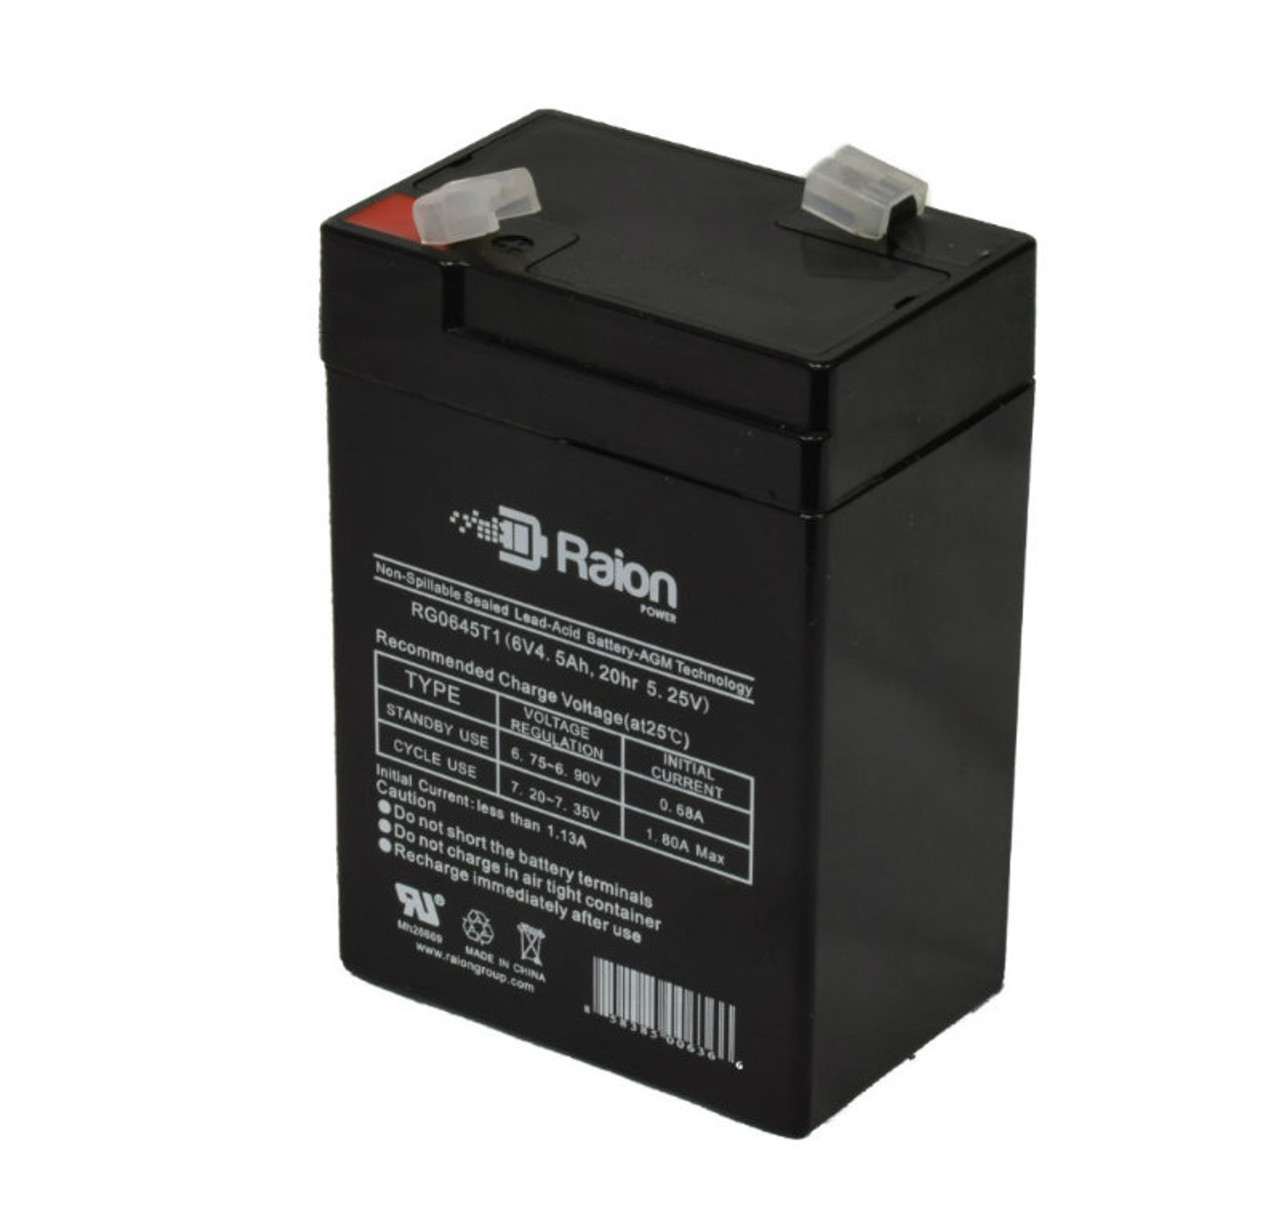 Raion Power RG0645T1 6V 4.5Ah Replacement Battery Cartridge for FengSheng FS6-4.5